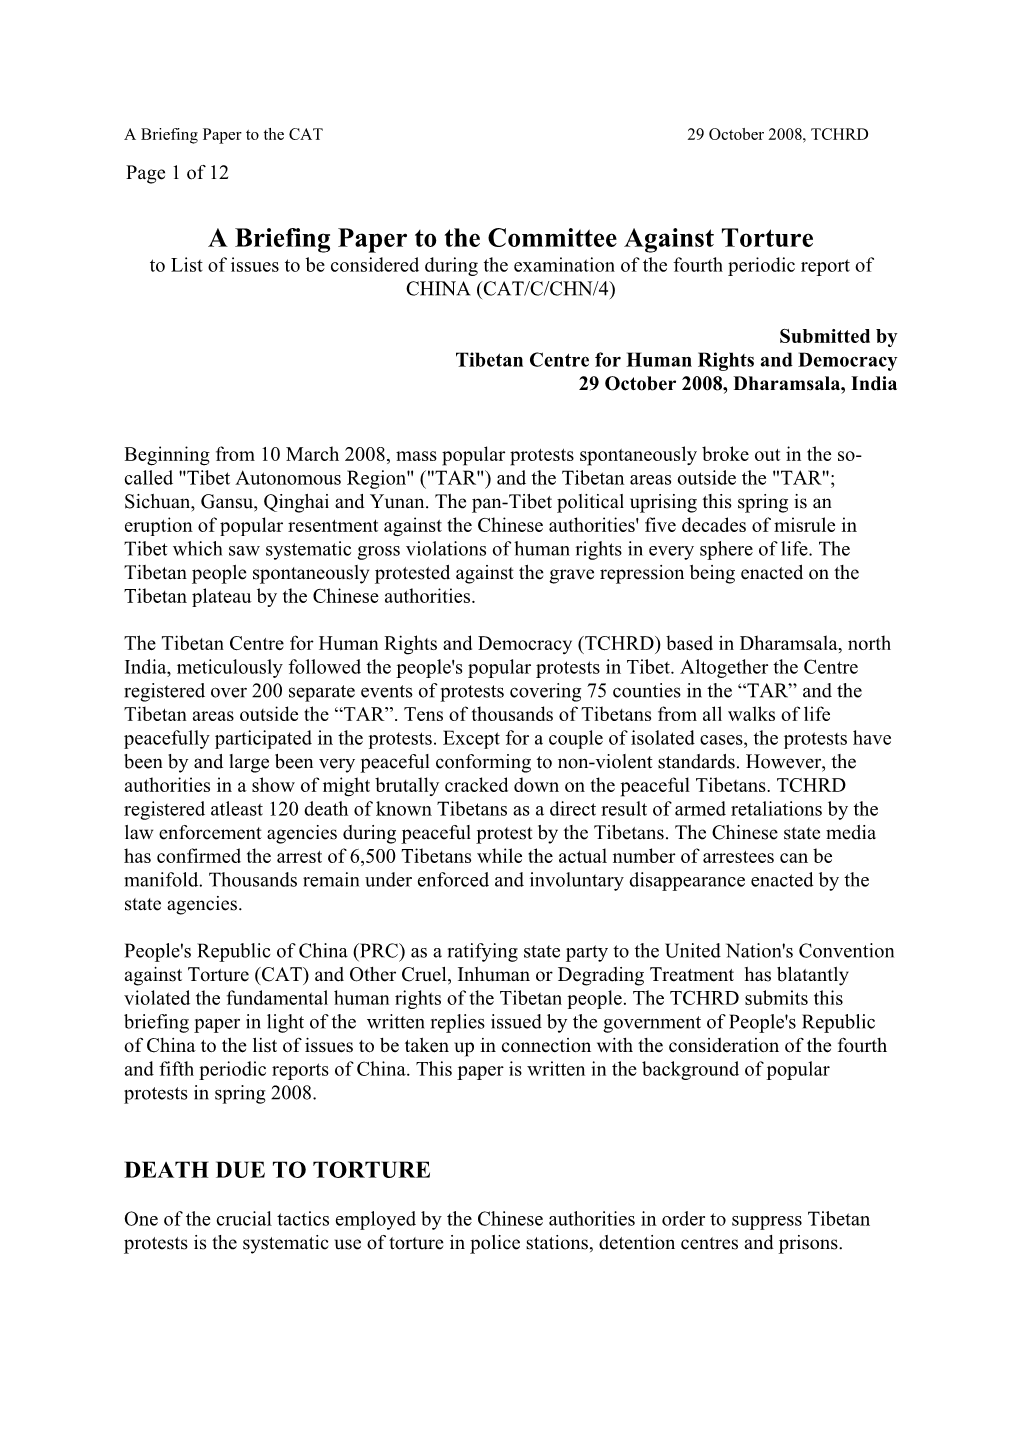 A Briefing Paper to the Committee Against Torture to List of Issues to Be Considered During the Examination of the Fourth Periodic Report of CHINA (CAT/C/CHN/4)